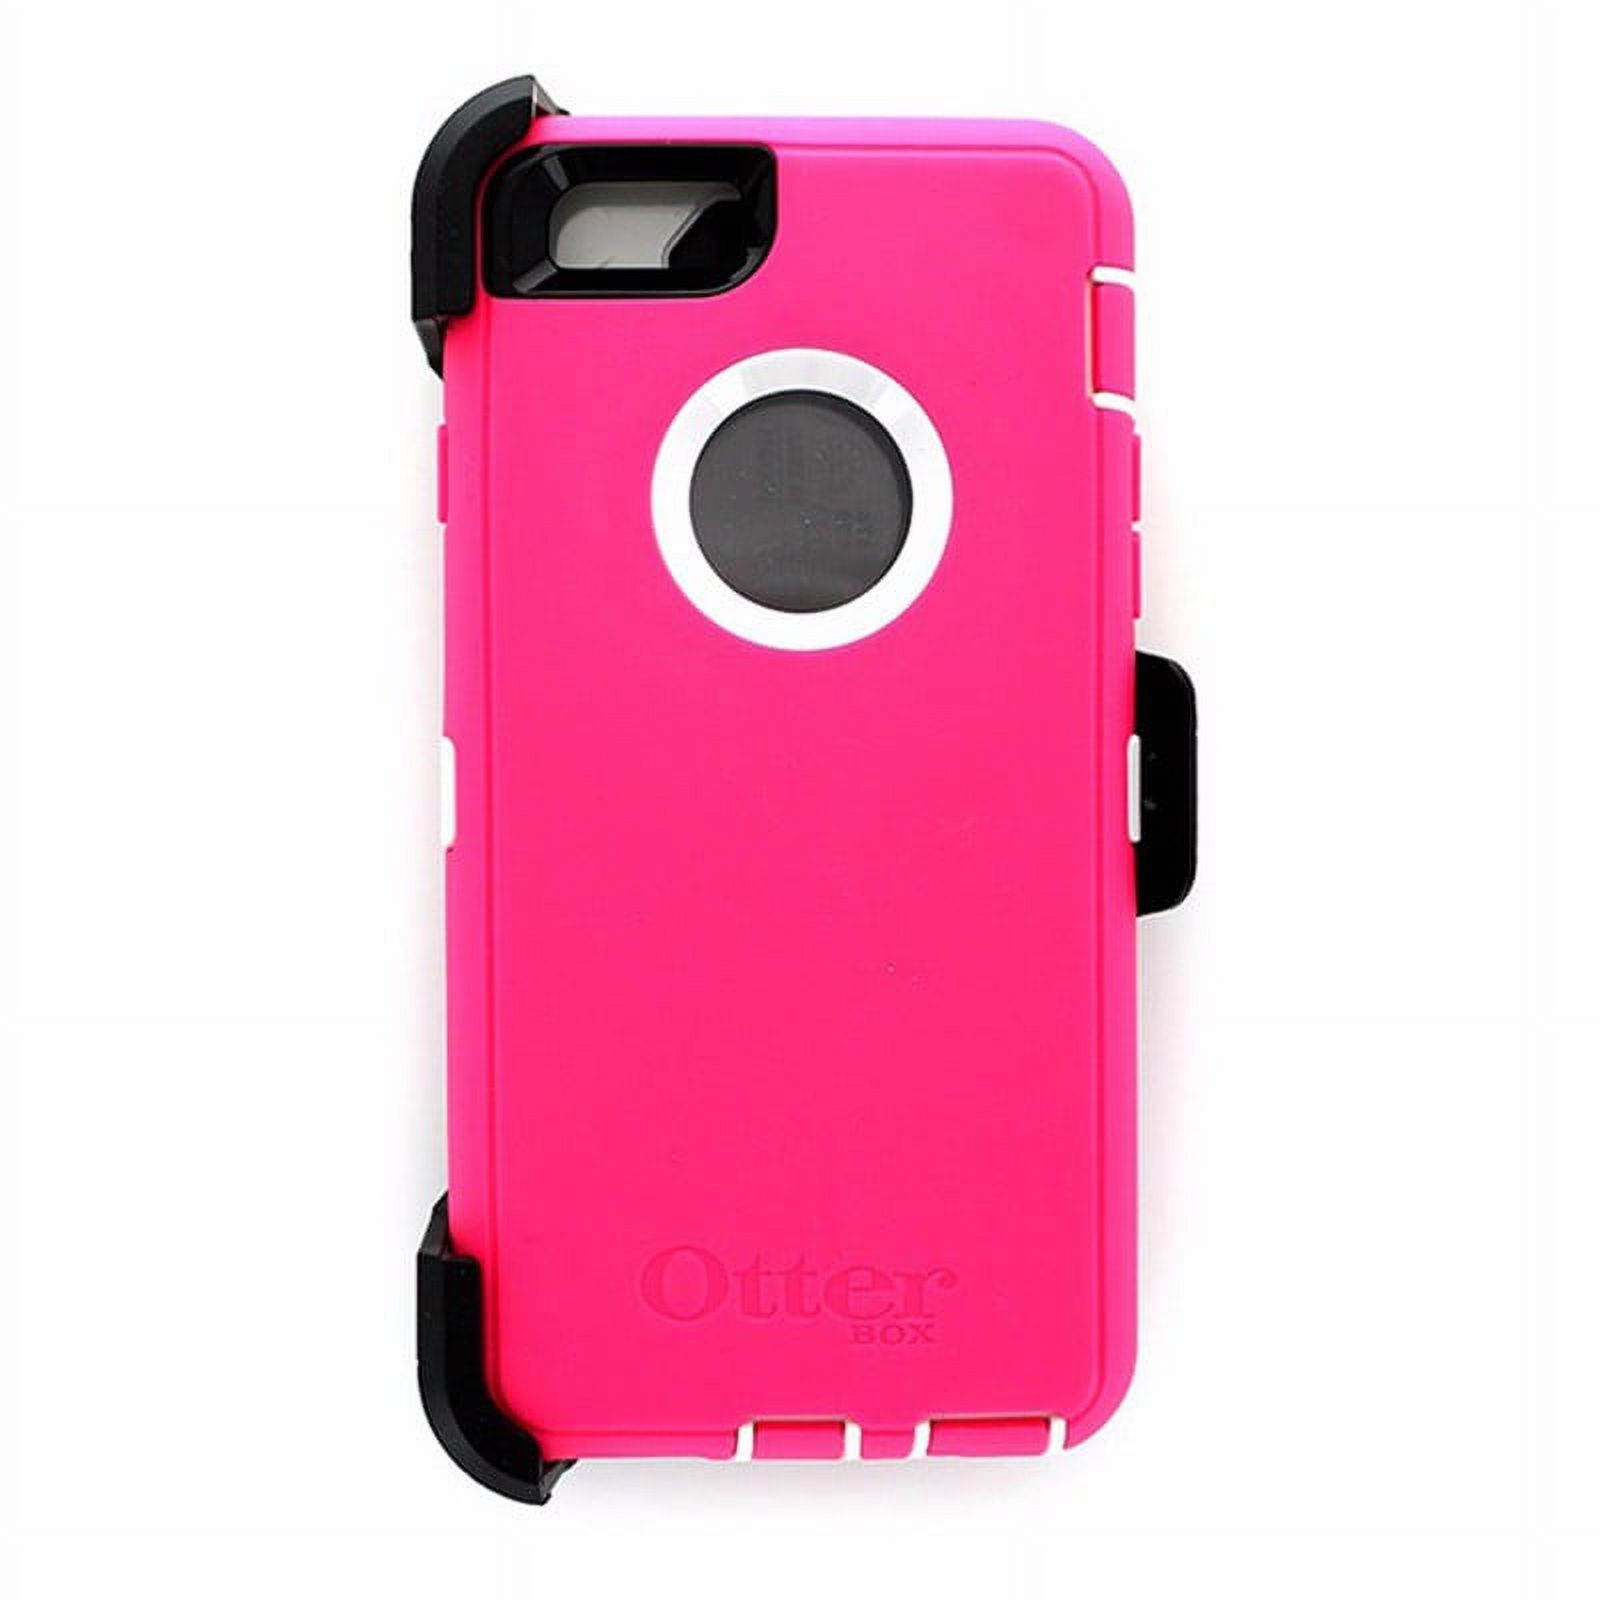 iPhone 6 Otterbox case defender series - image 1 of 2